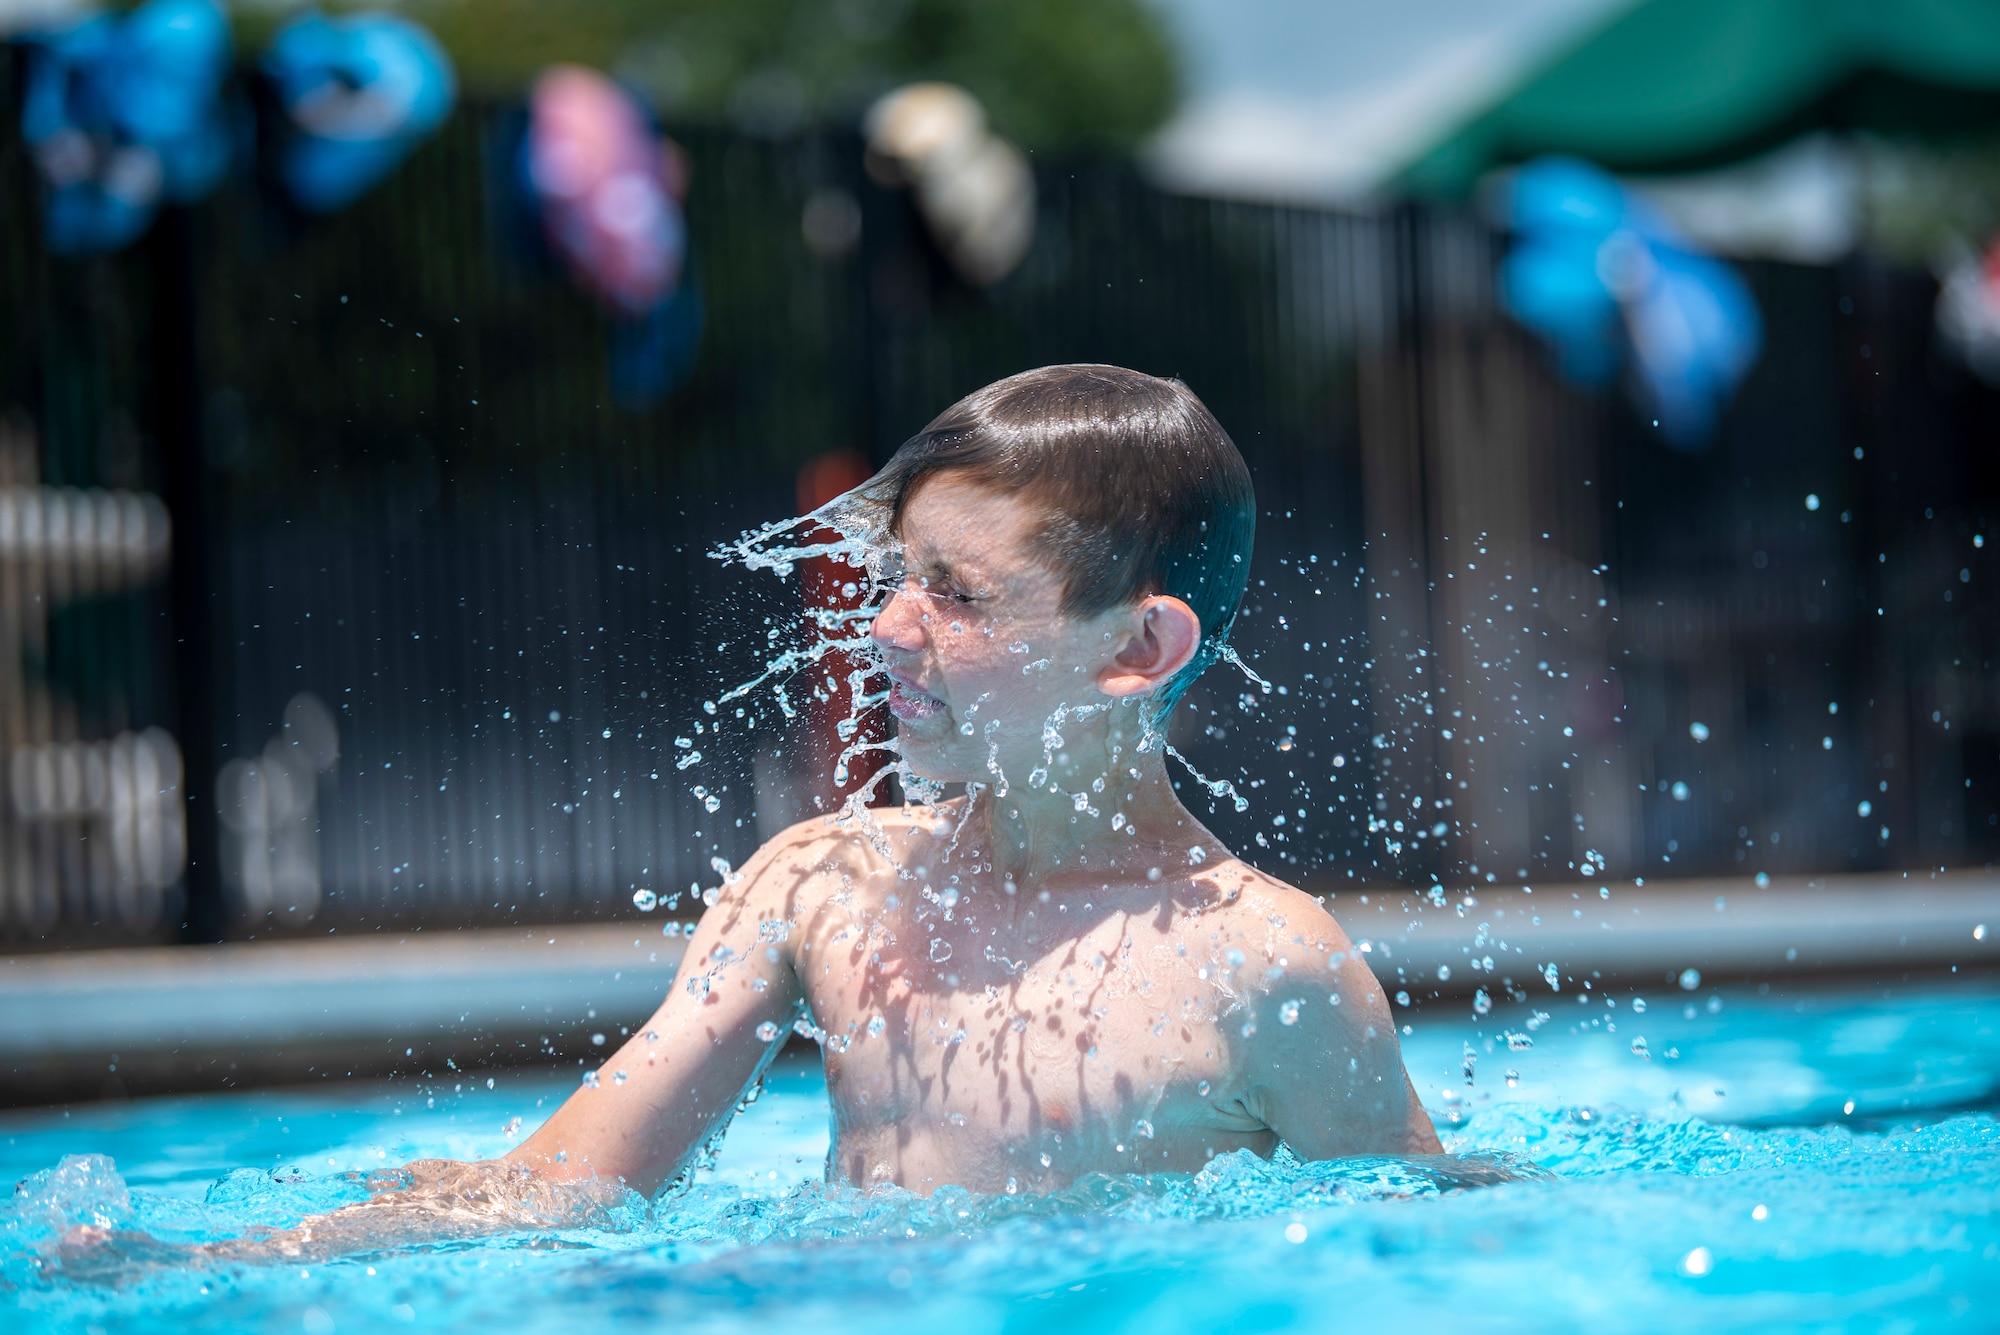 Cole Wexler, son of Master Sgt. Arik Wexler, 736th Aircraft Maintenance Squadron lead production superintendent, comes up for air at the Oasis Pool at Dover Air Force Base, Del., July 14, 2021. During summer break, the pool is open 11 am to 7 pm daily for military members, family and friends. The pool no longer has block sessions for attendees, but has a capacity limit of 200 people.  (U.S. Air Force photo by Tech. Sgt. Nicole Leidholm)